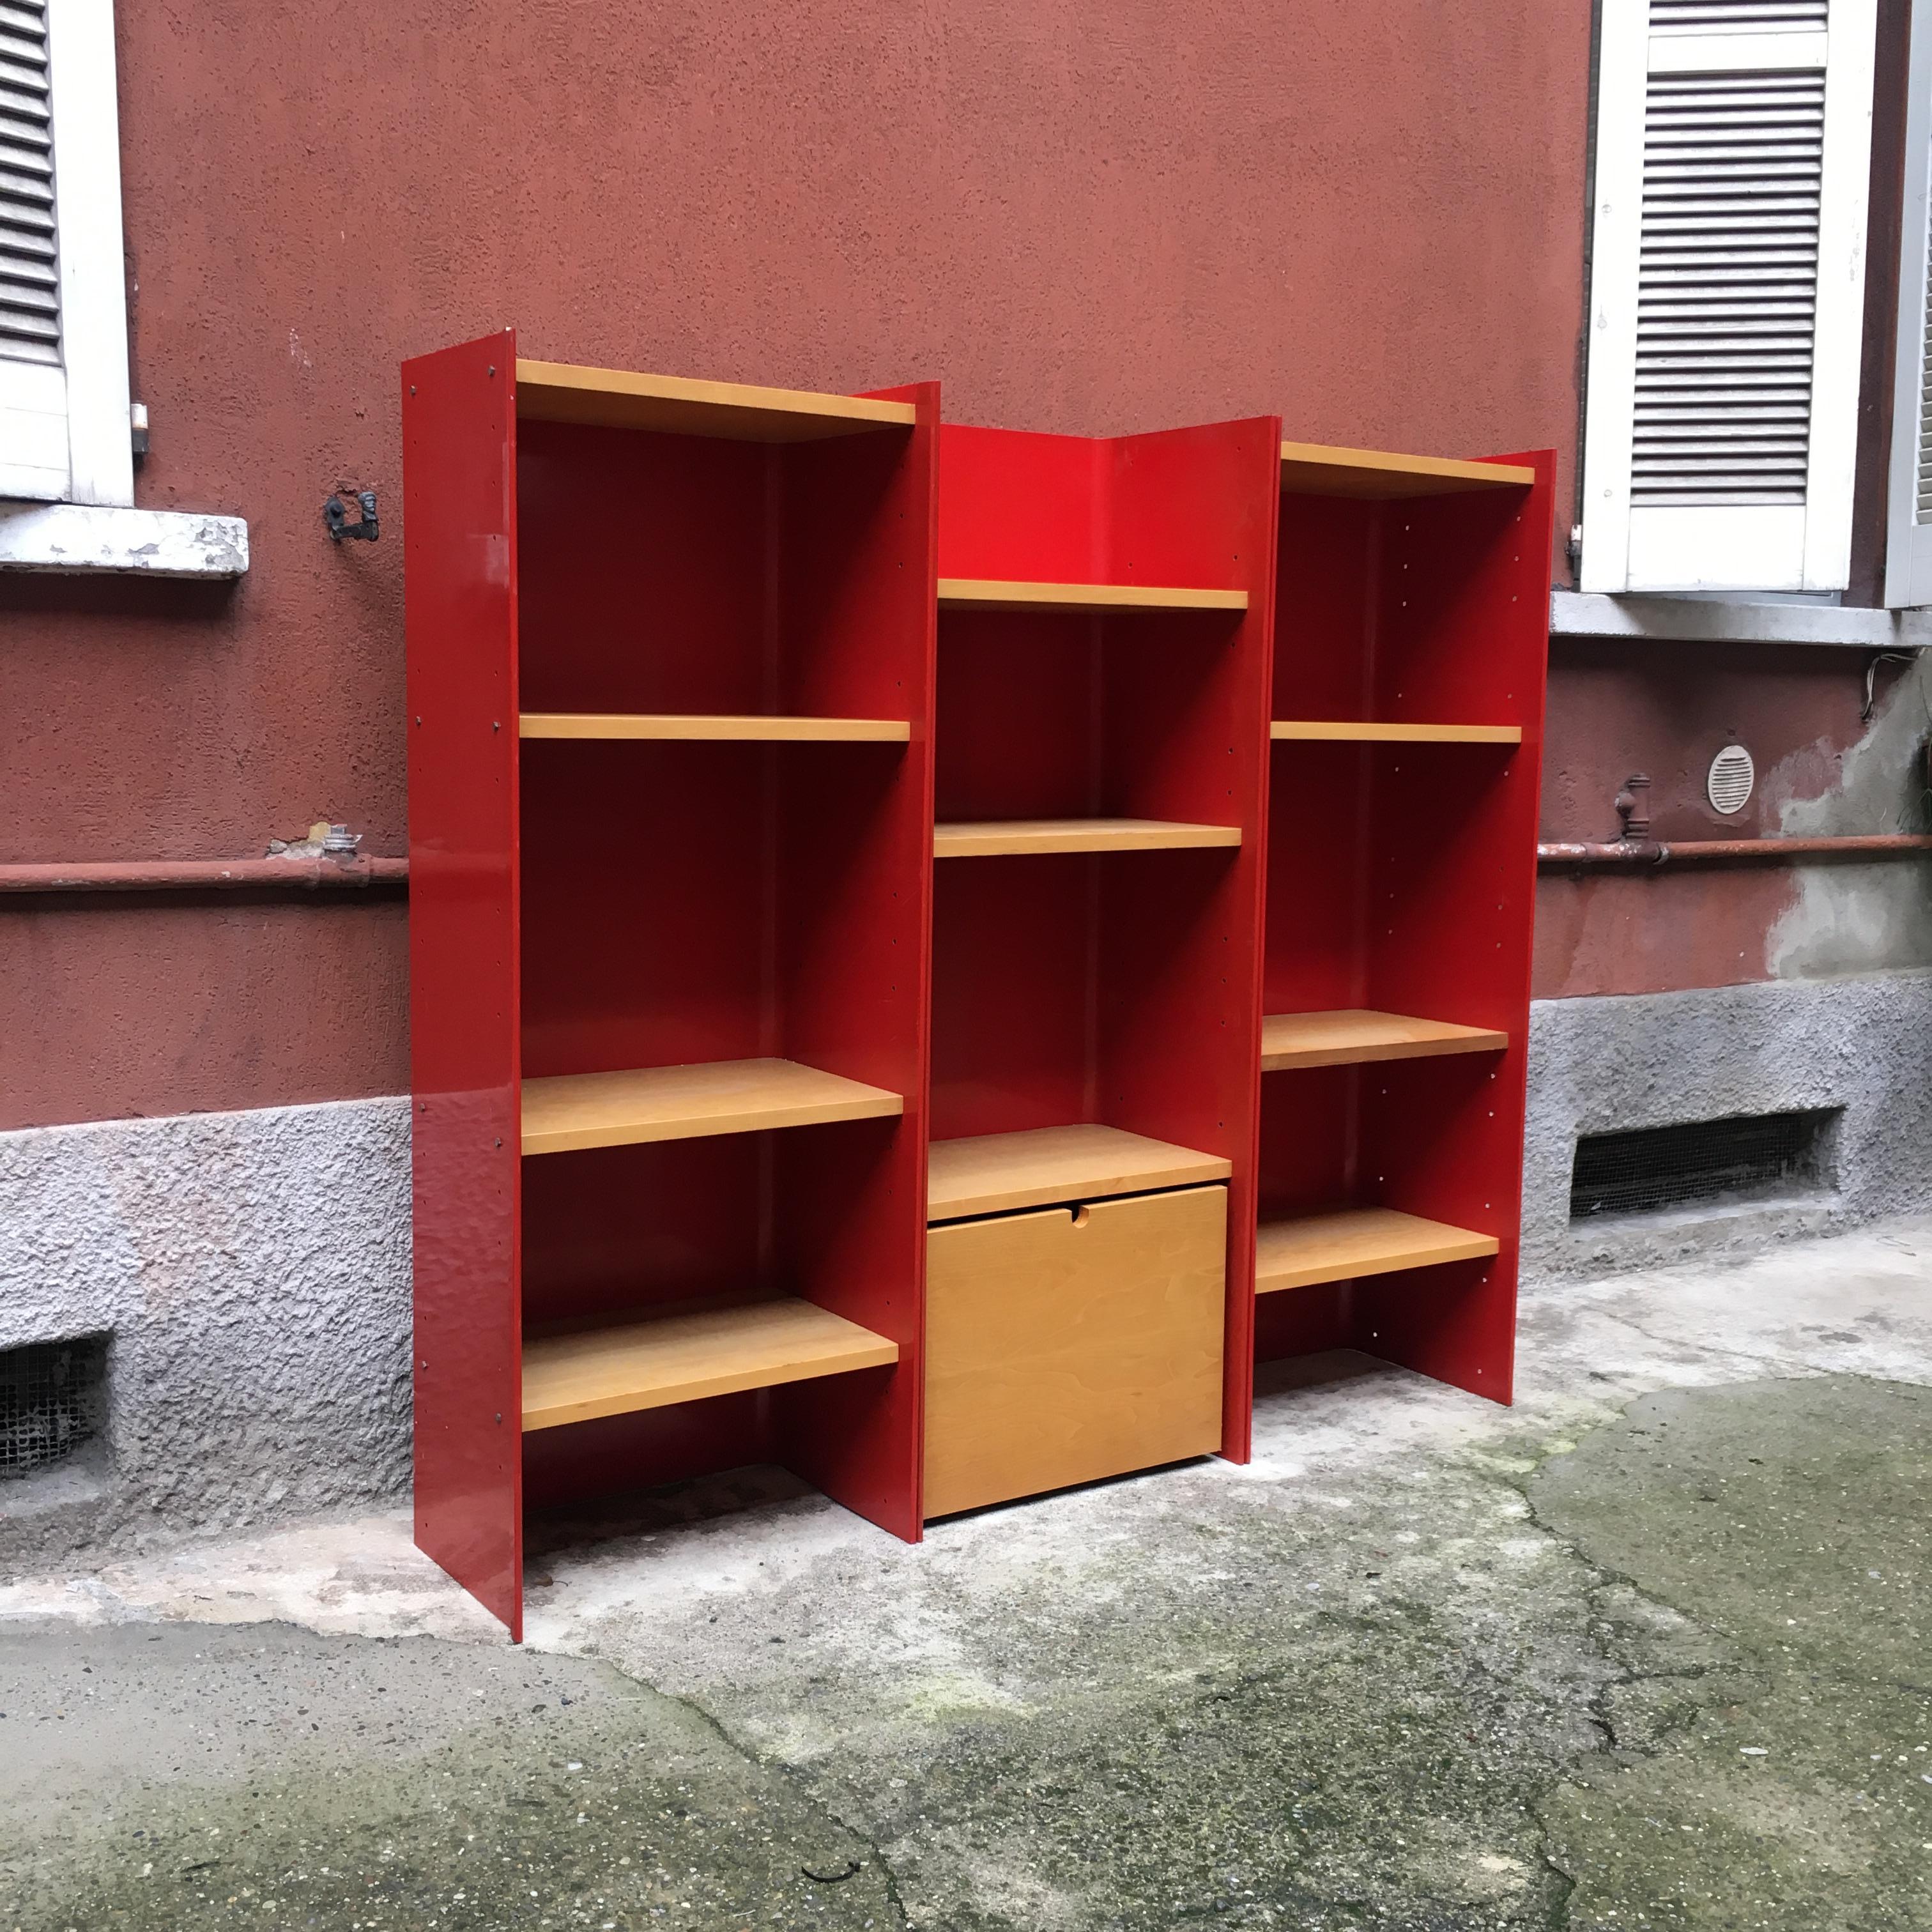 Late 20th Century Italian Freestanding Red Enamelled Metal Bookcase by Arflex, 1970s For Sale